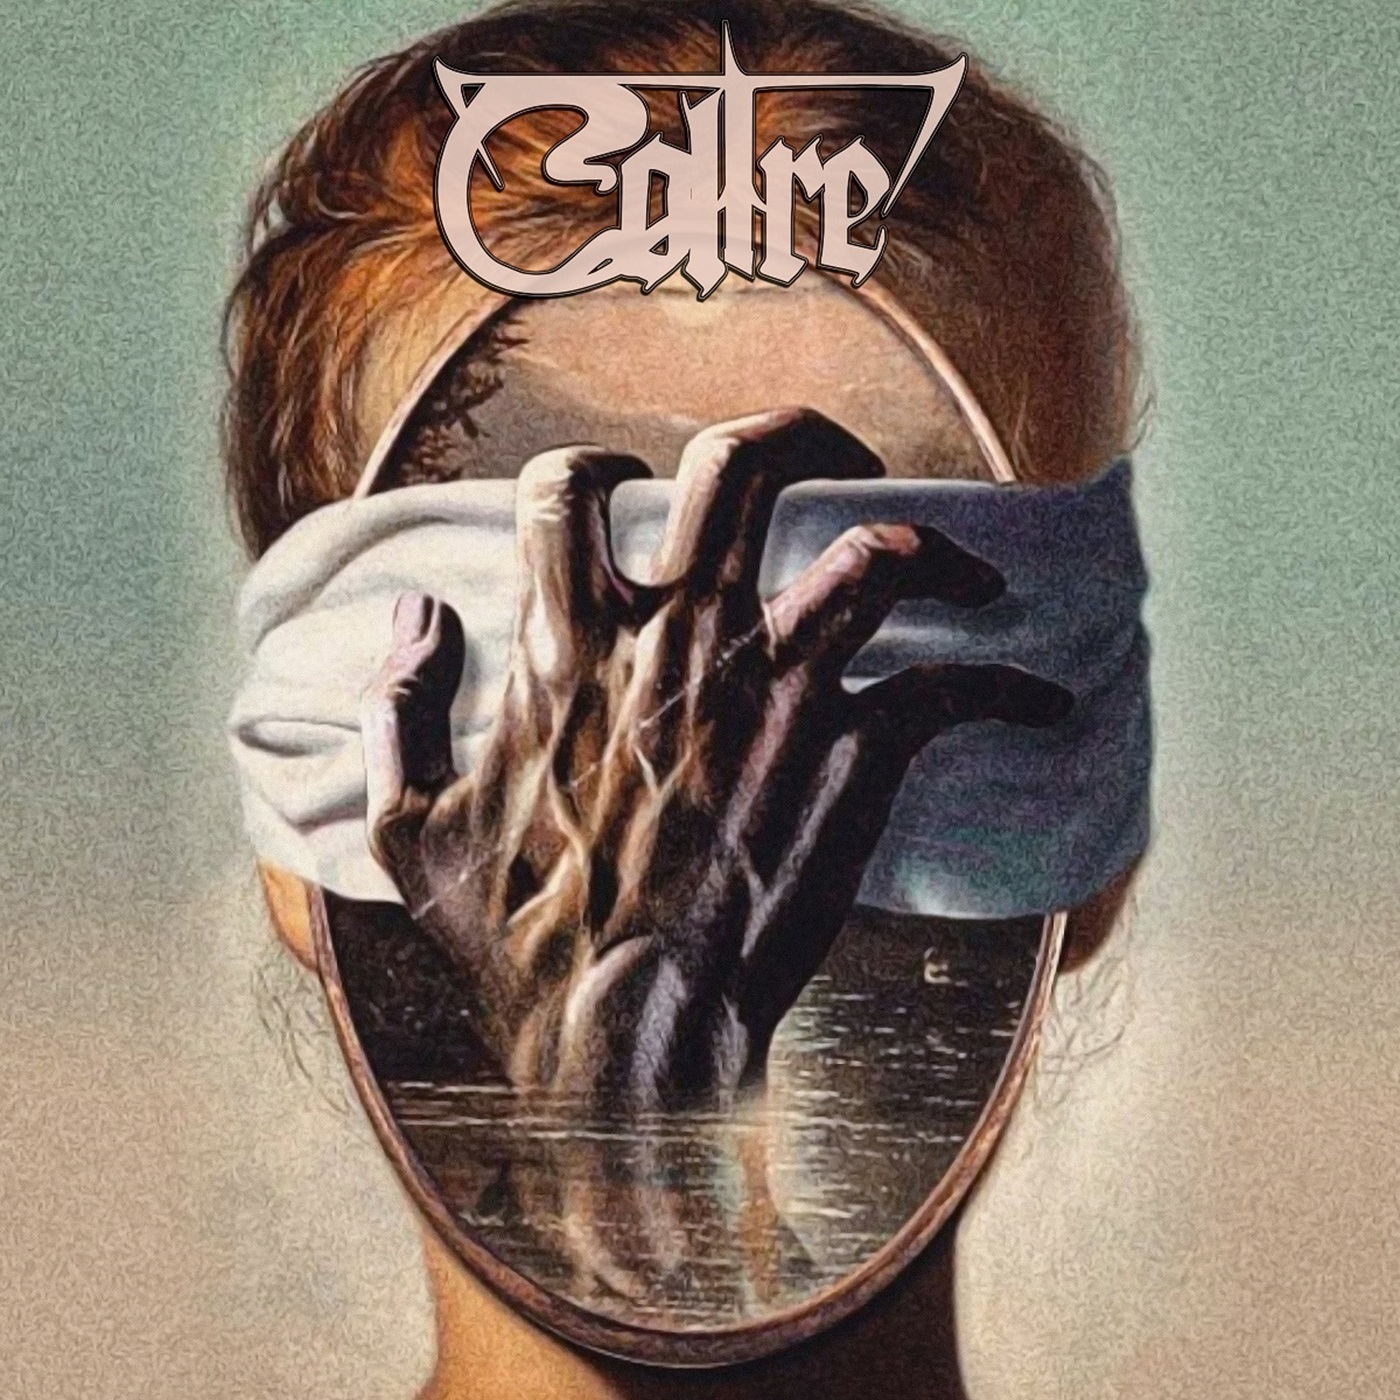 Coltre-To-Watch-With-Hands-Cover-Artwork.jpg